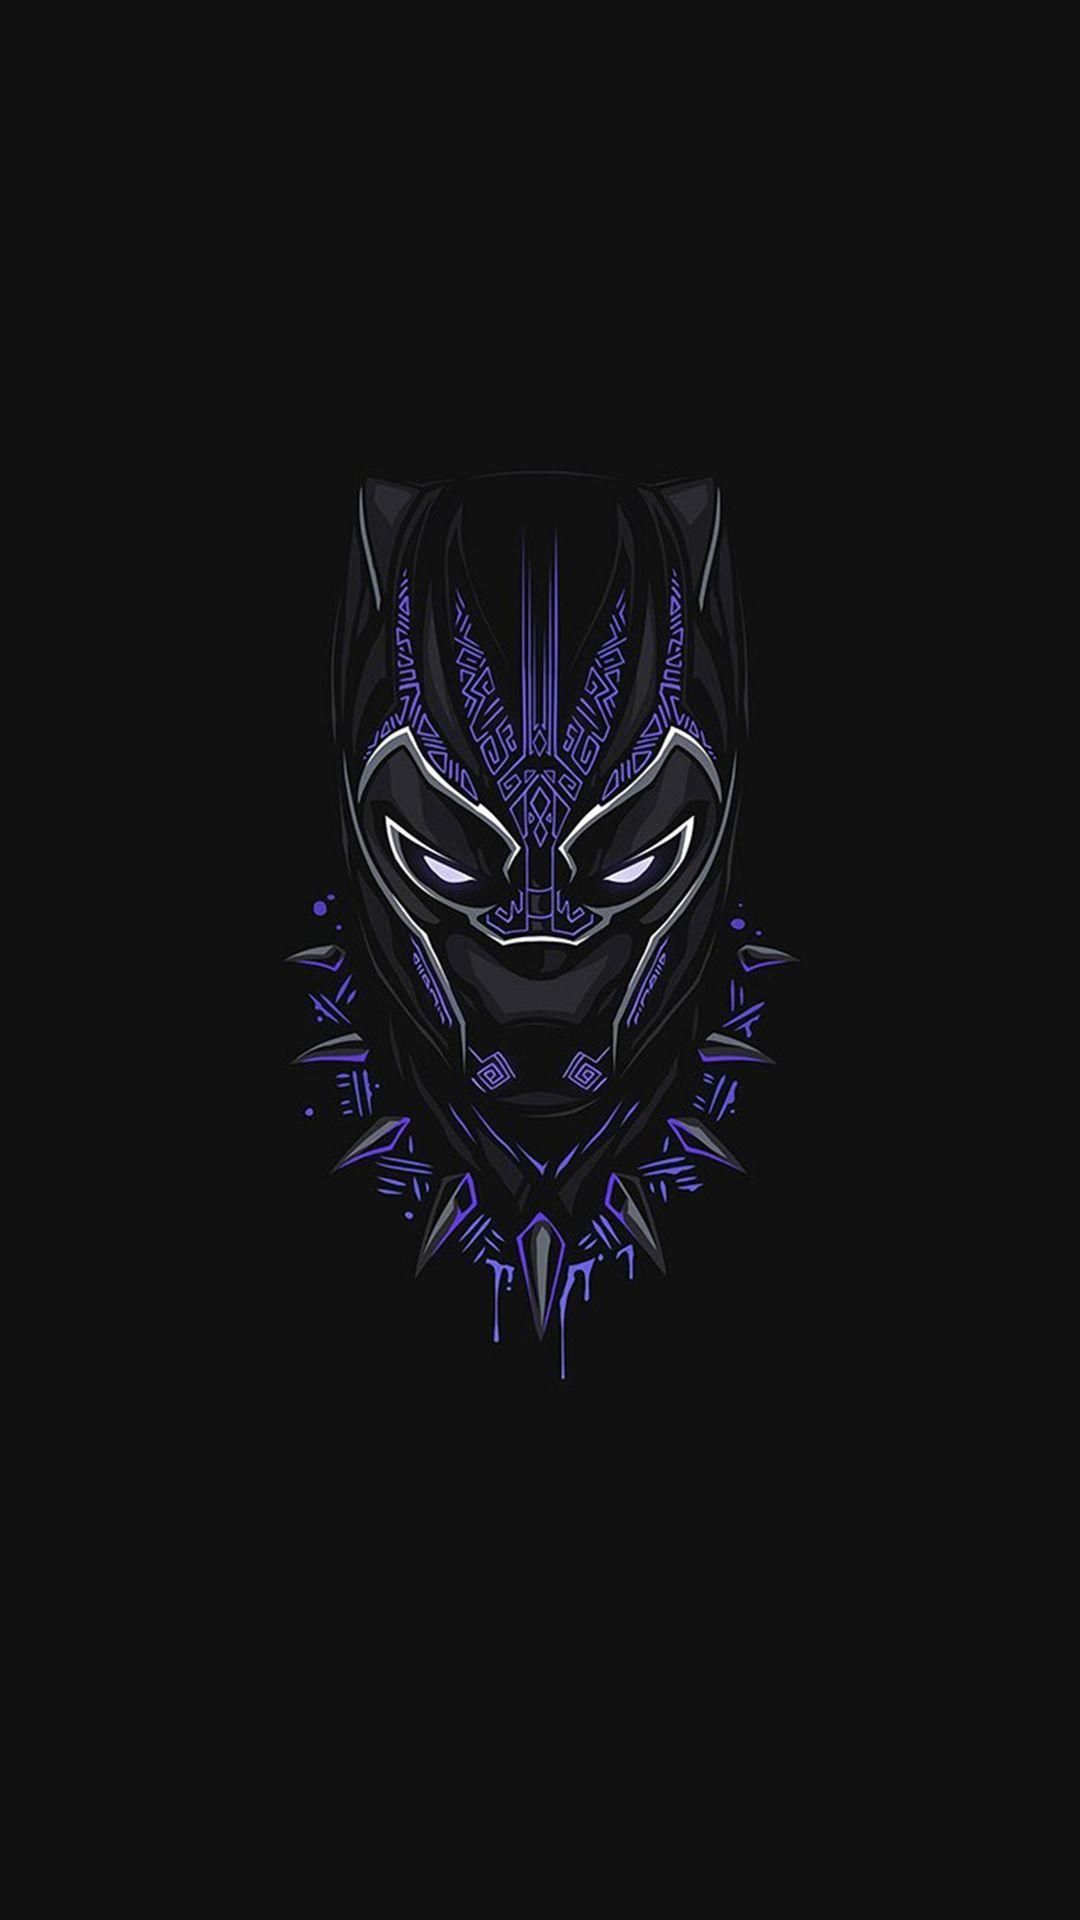  Black  Panther  Wallpaper  For Android Phone  Impremedia co